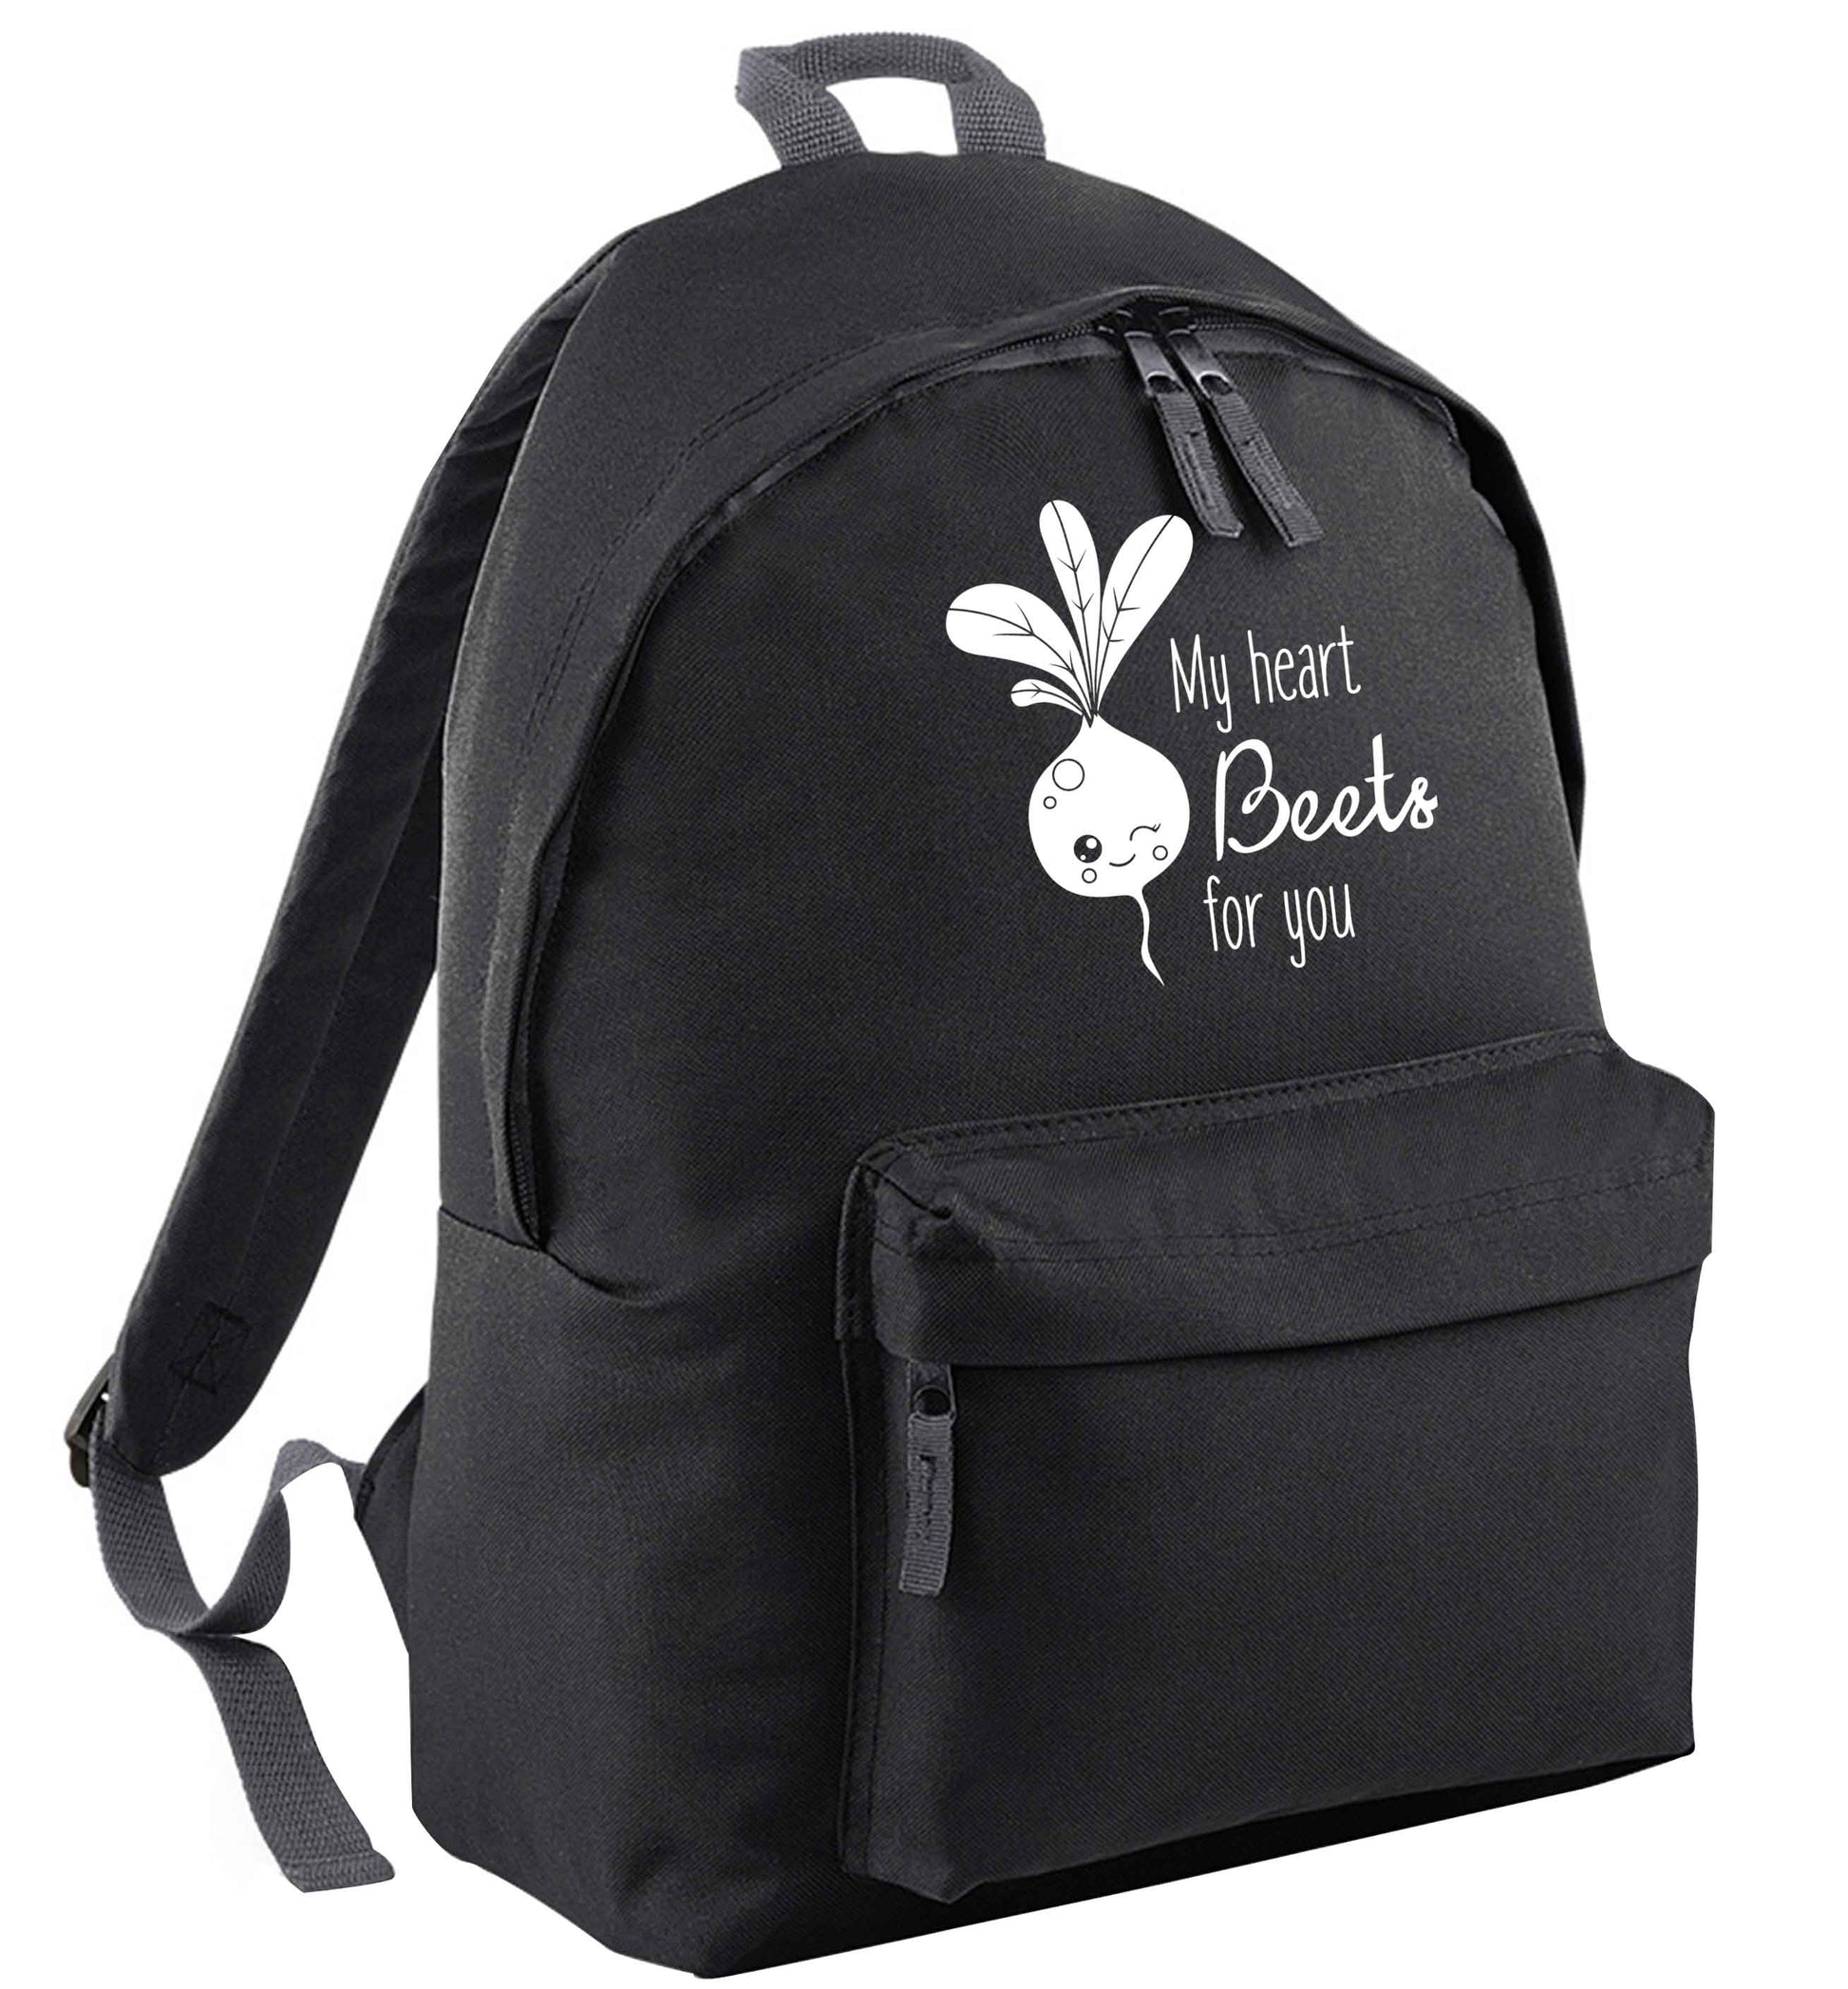 My heart beets for you | Children's backpack